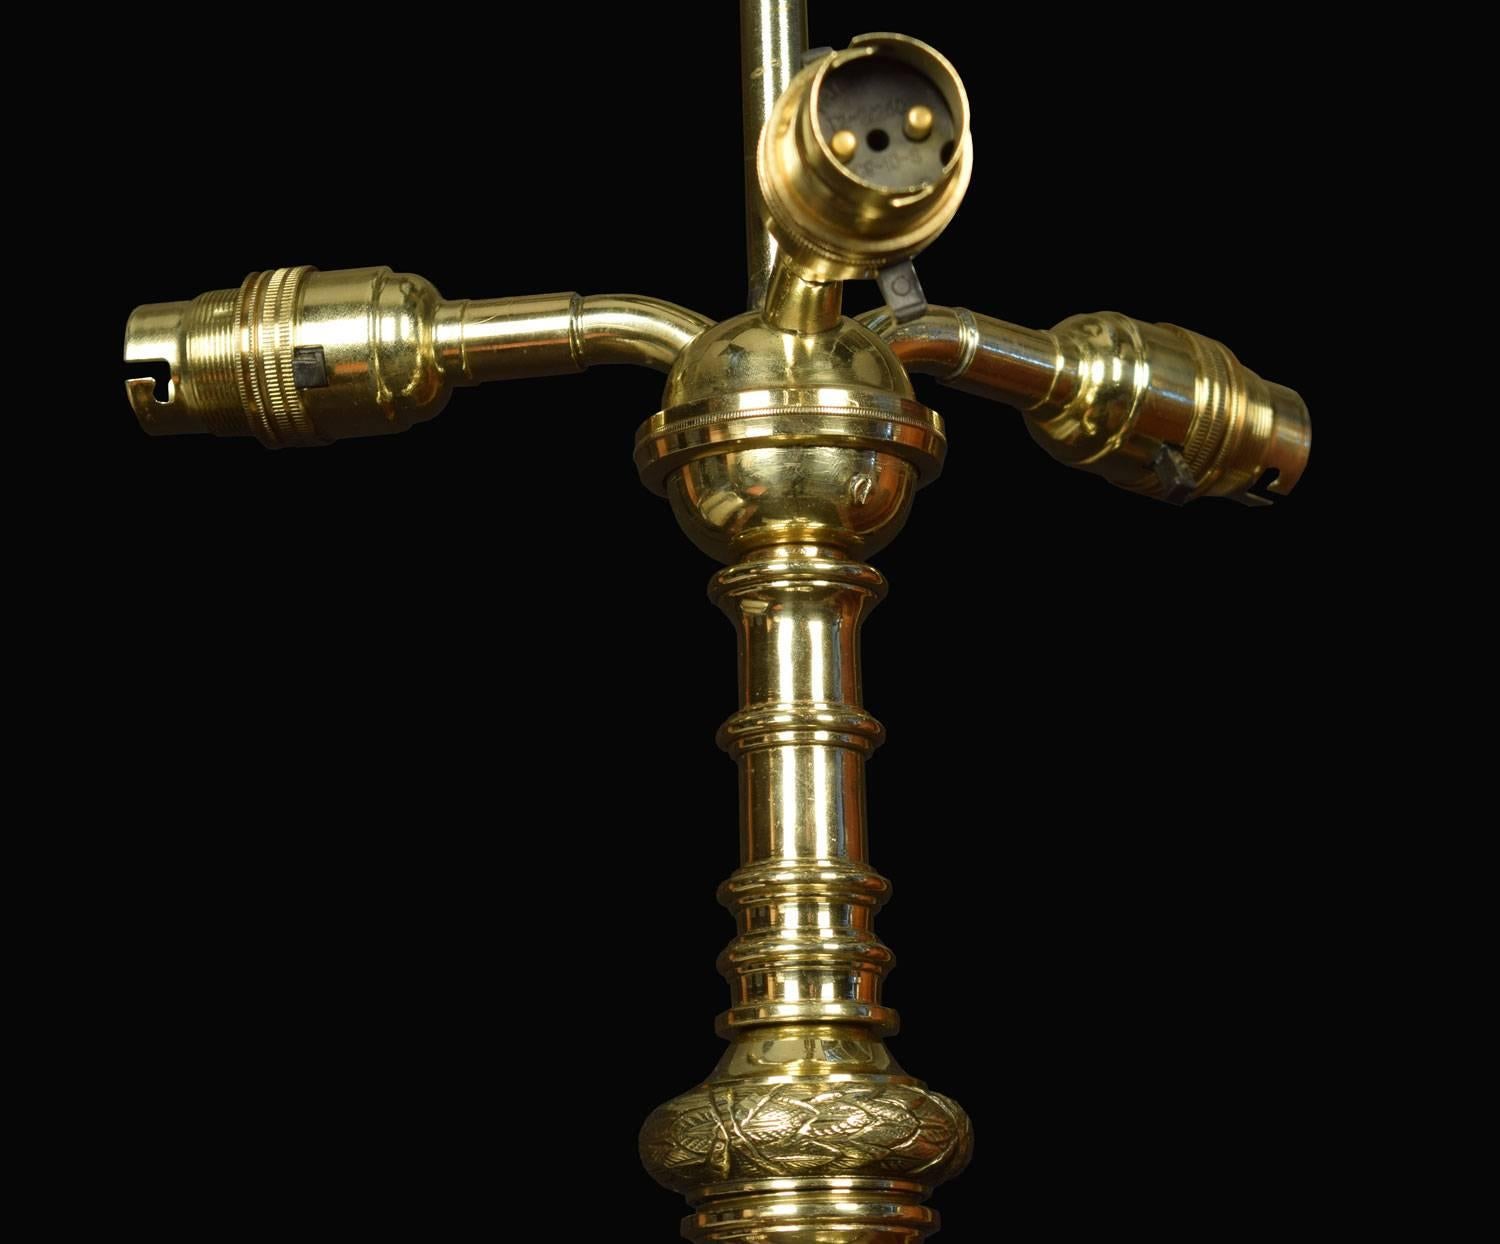 19th century brass standard lamp, the original shade above with reeded column and adjustable top column, on shaped splayed base with ram's heads and hoof feet (has been re-wired probably Irish)
Dimensions:
Height 65.5 inches adjustable to 84